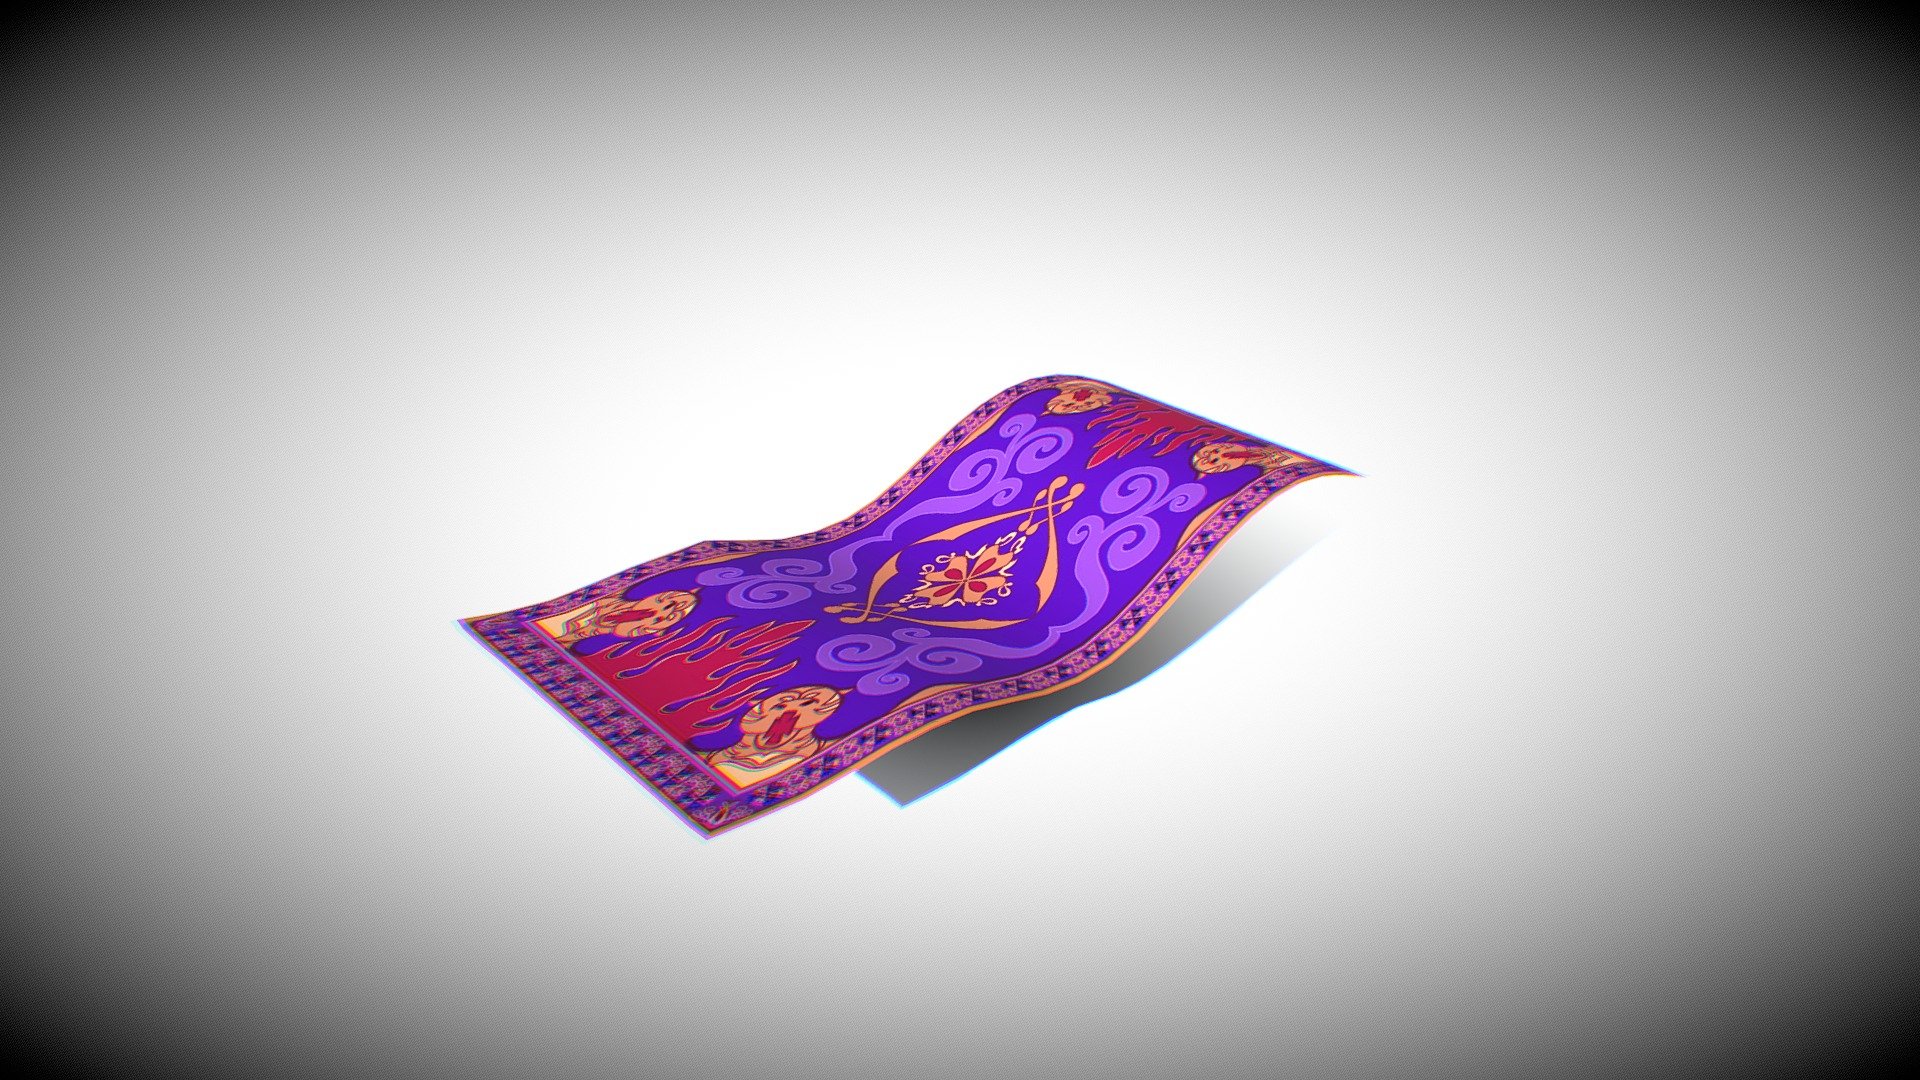 A Carpet lowpoly created in maya, inspireted in the Aladin Carpet from disney - Aladin Carpet - 3D model by Gioia2 3d model